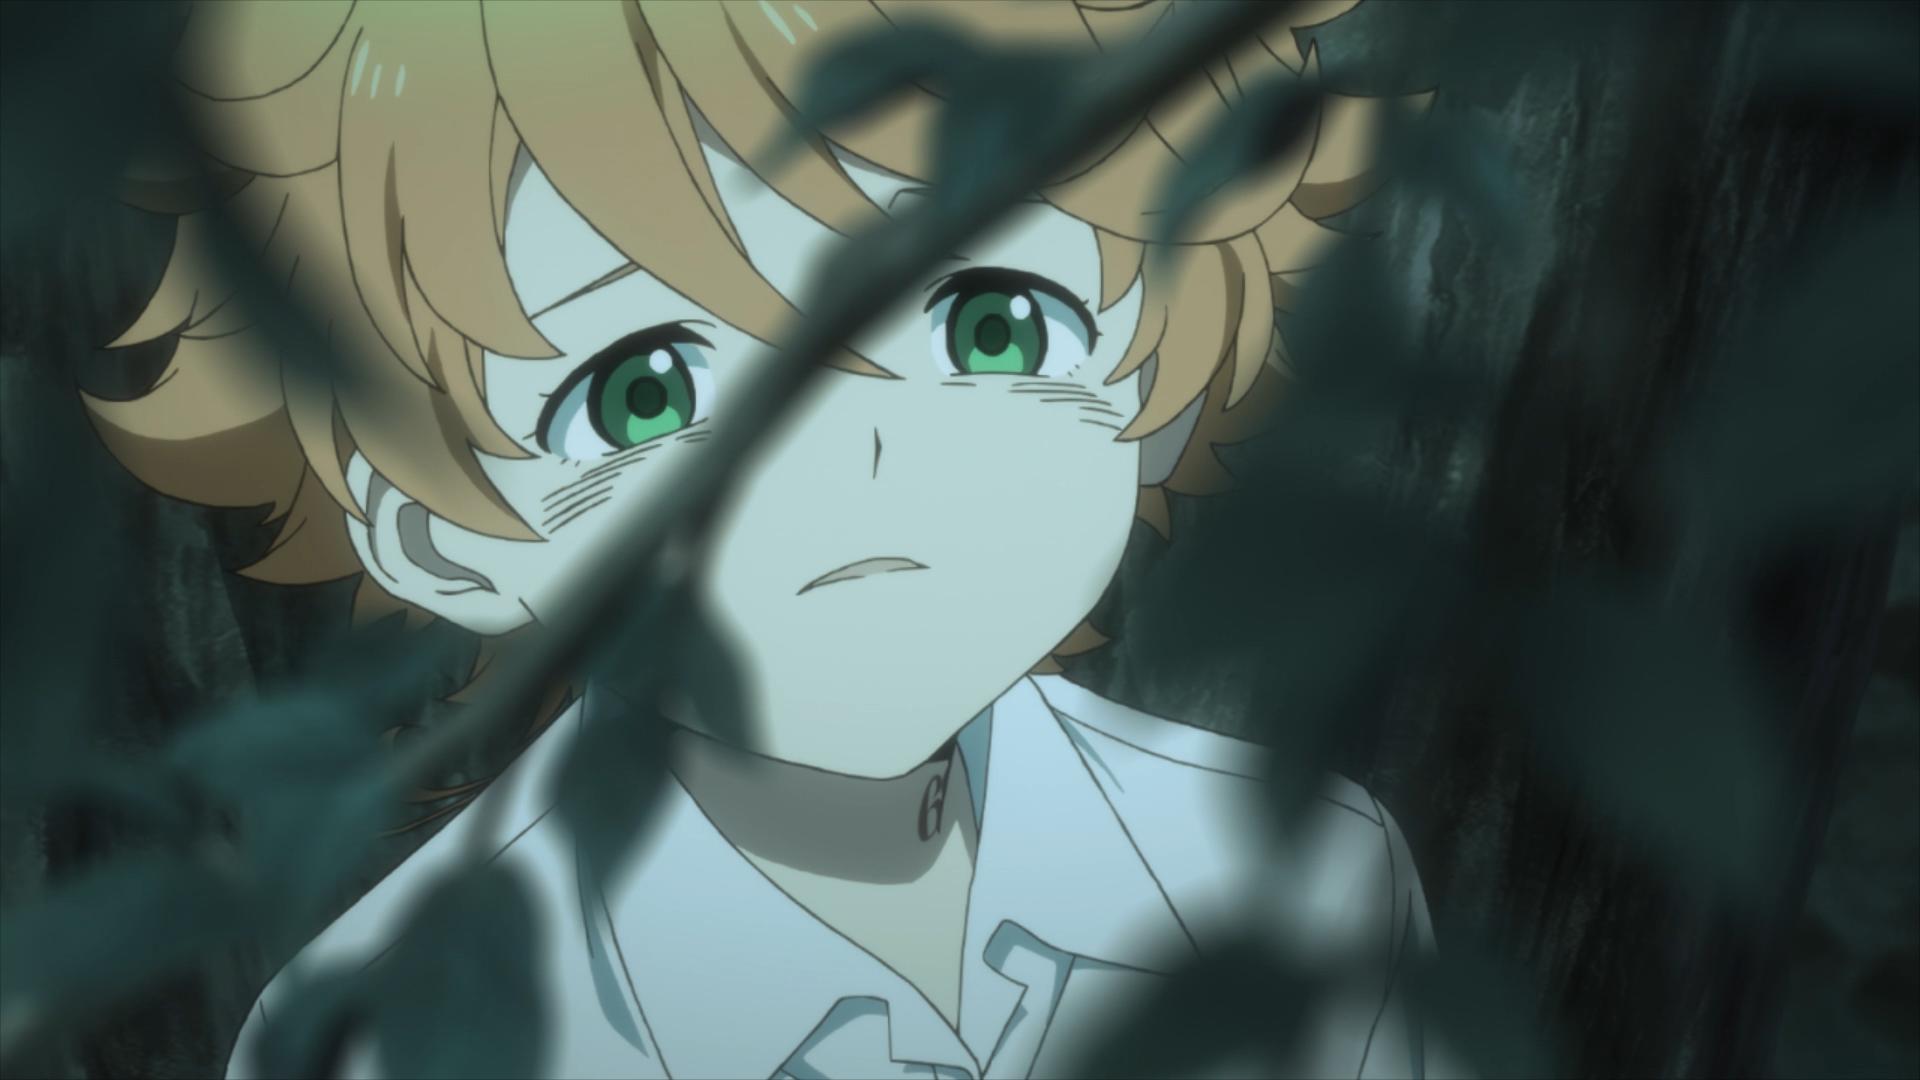 CloverWorks Global on X: In preparation for the Second Season of The Promised  Neverland, we will show off character and expression designs of childhood  versions of the main characters. First up is